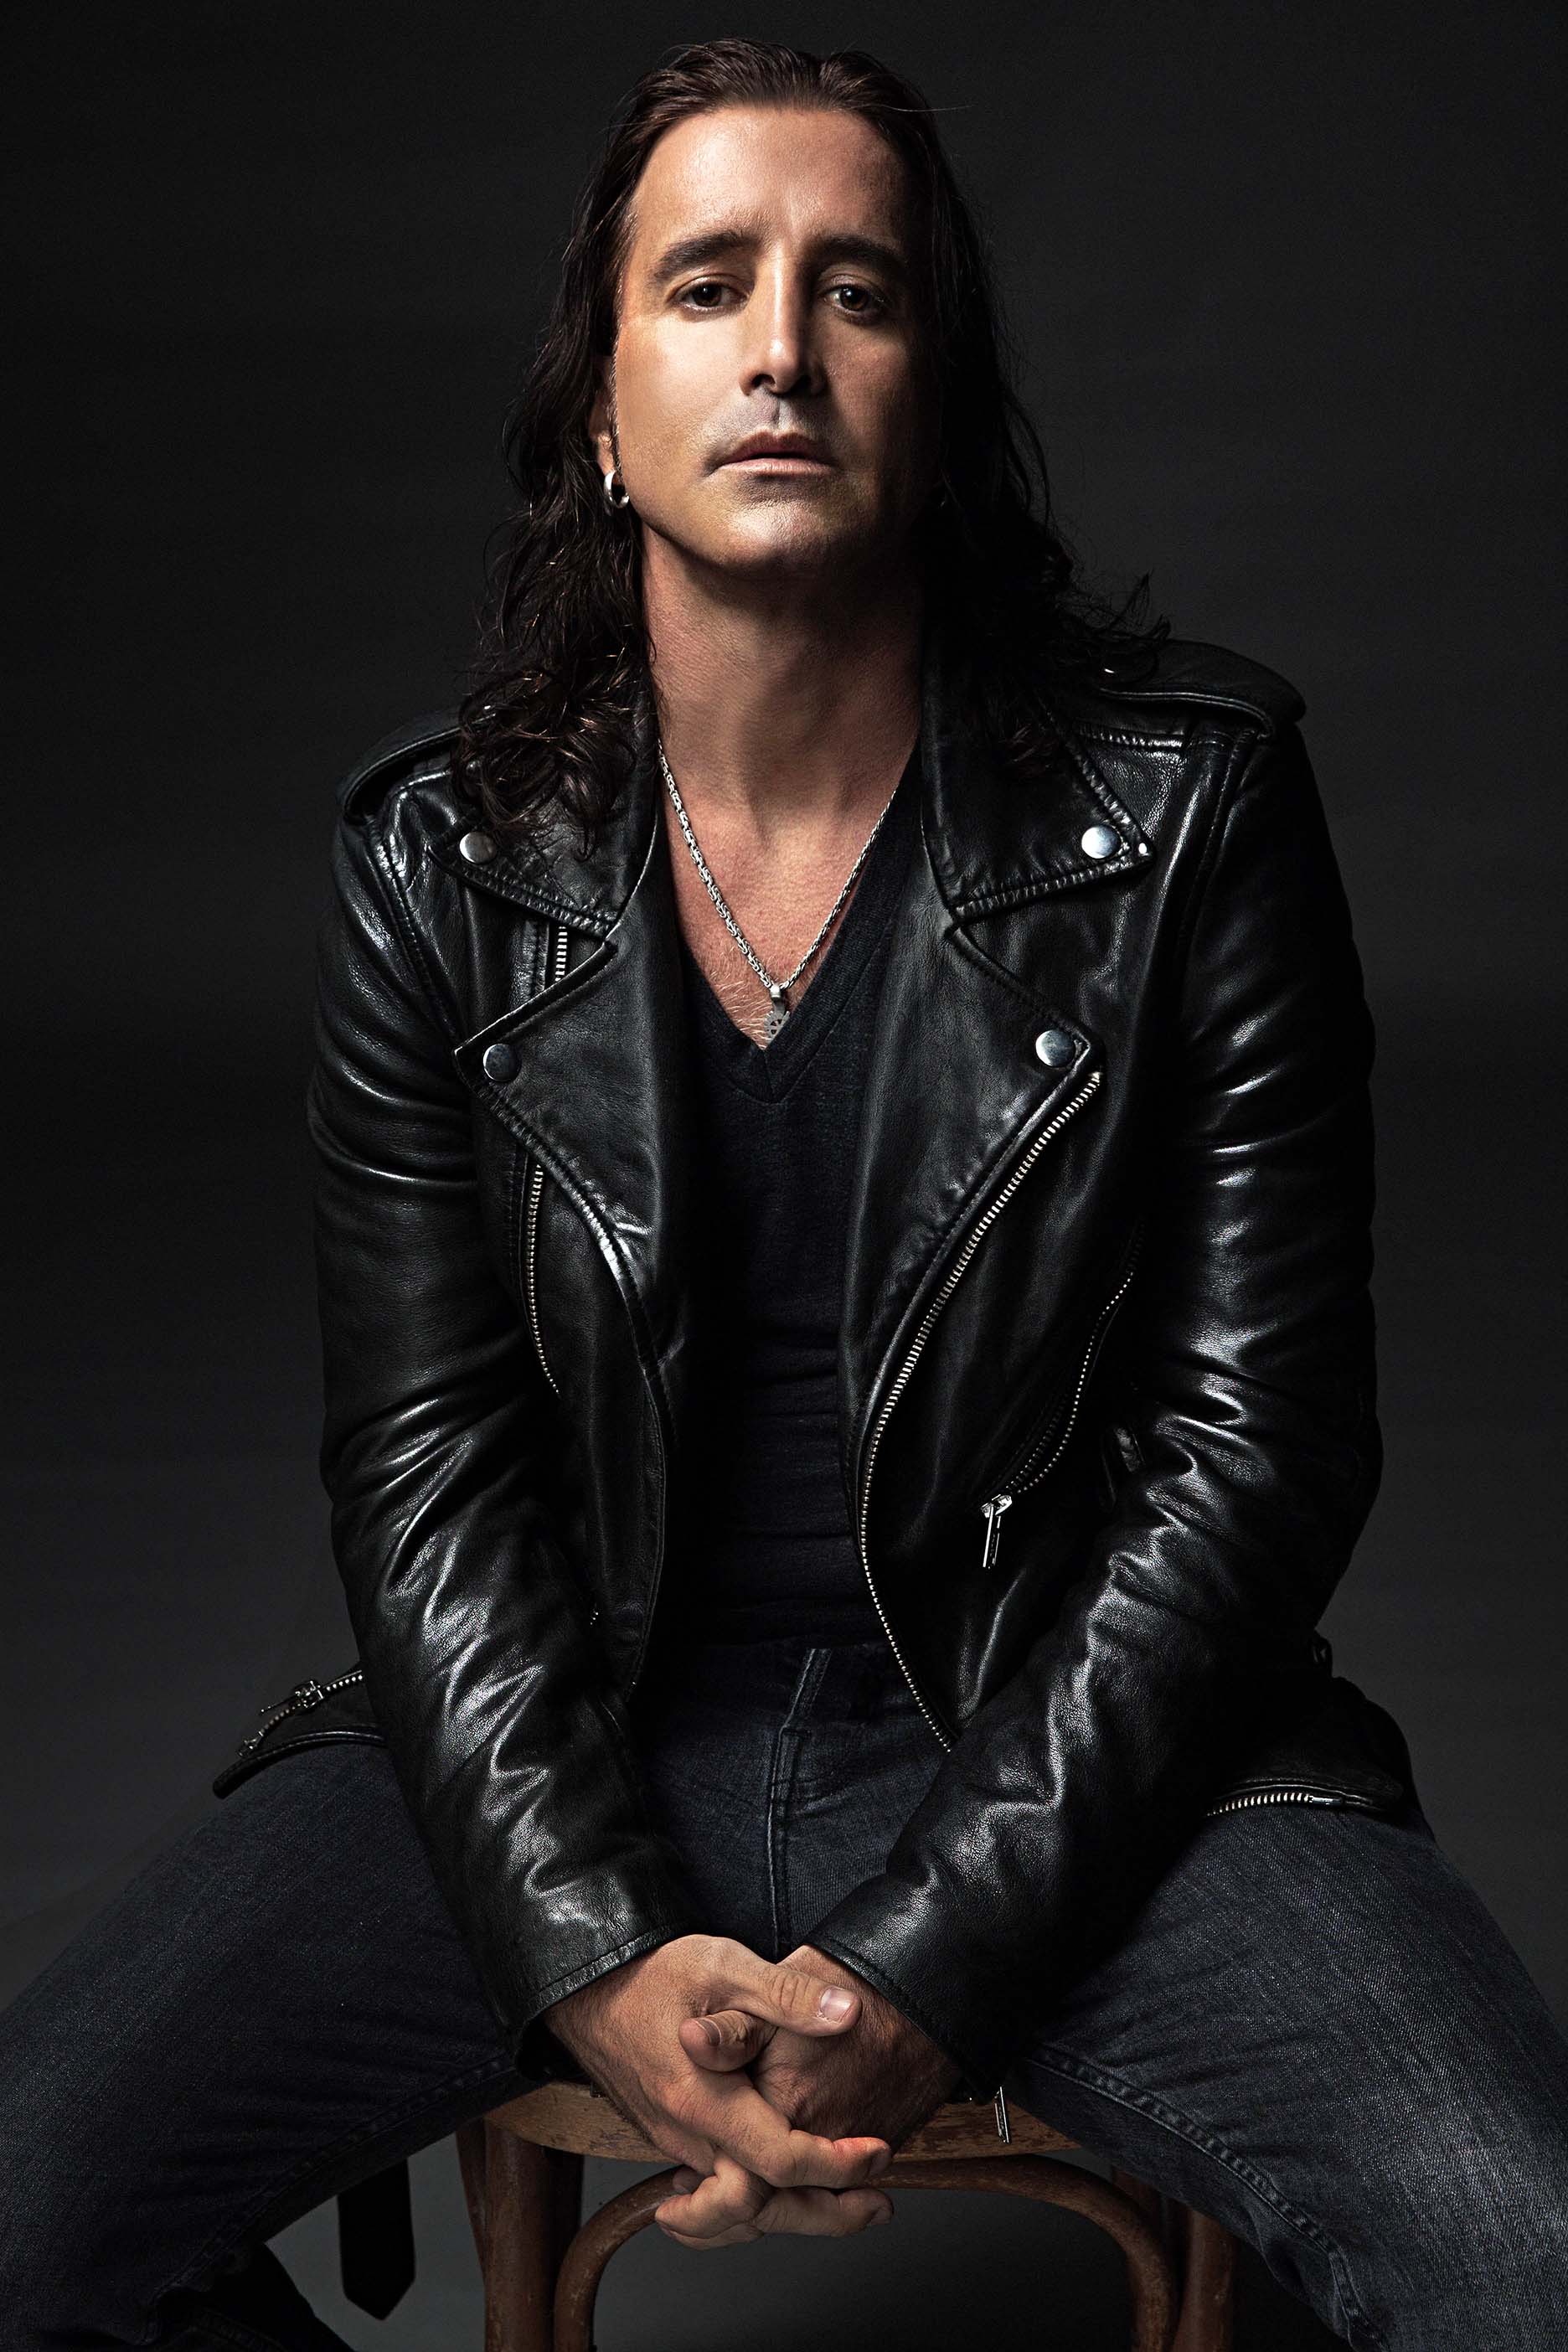 Scott Stapp Voice of Creed tickets, presale info and more Box Office